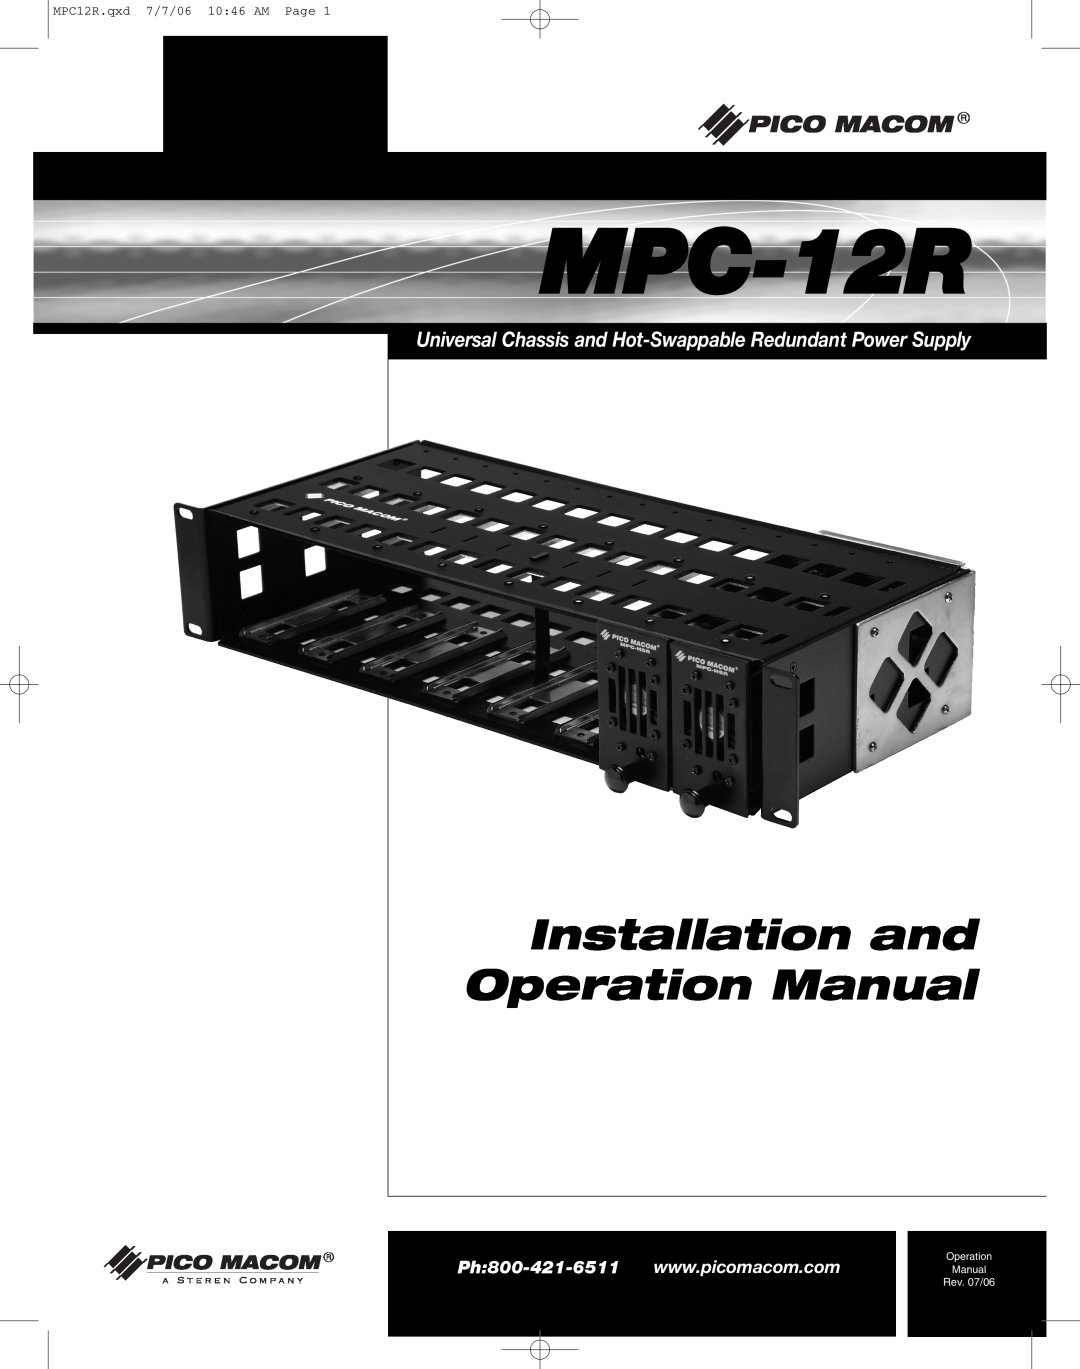 Pico Macom MPC-12R manual Universal Chassis and Hot-Swappable Redundant Power Supply, Installation and Operation Manual 